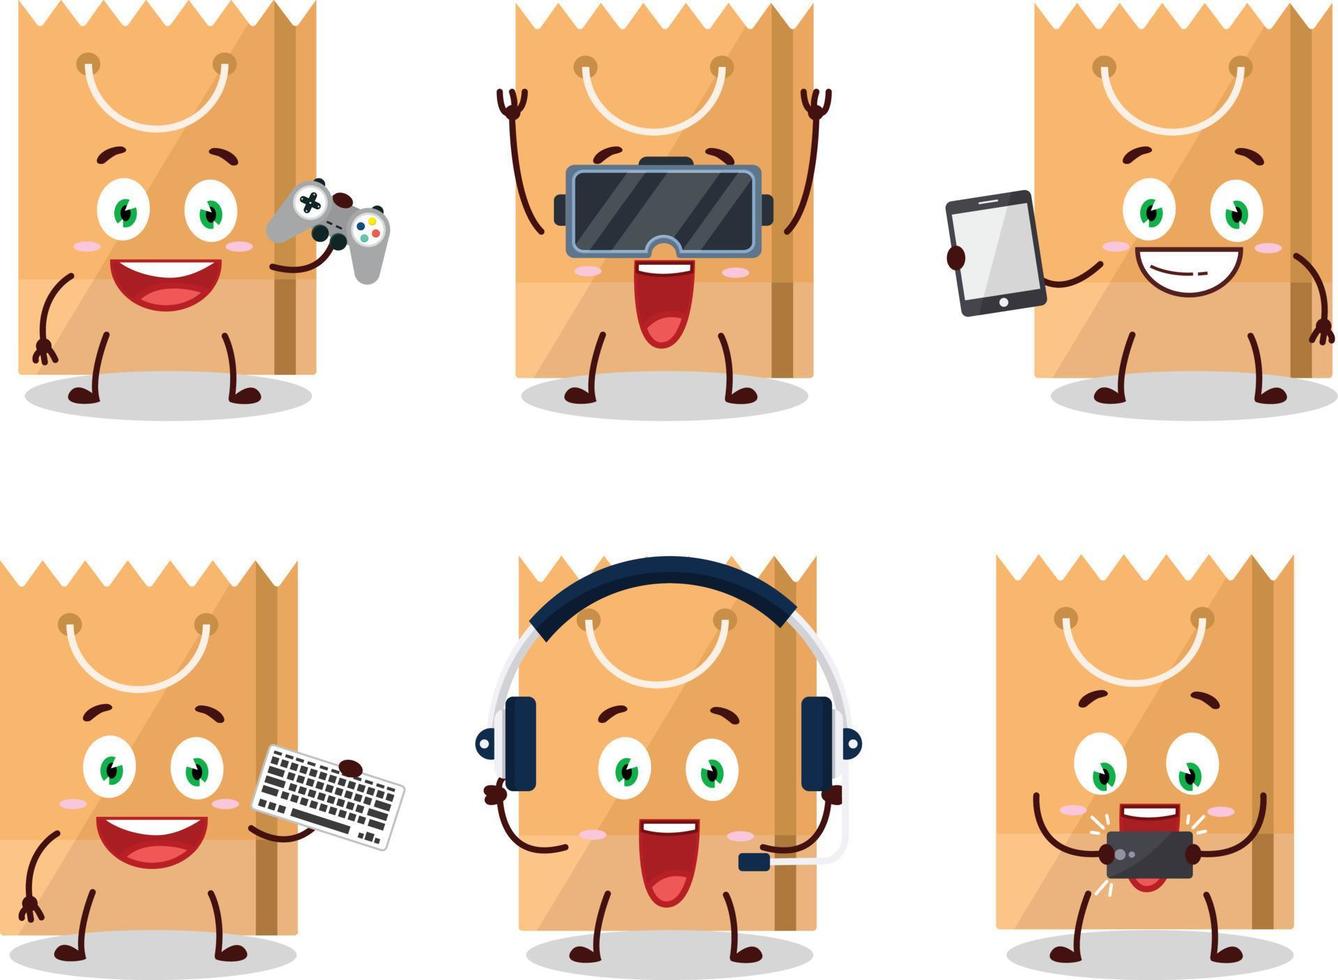 Grocery bag cartoon character are playing games with various cute emoticons vector